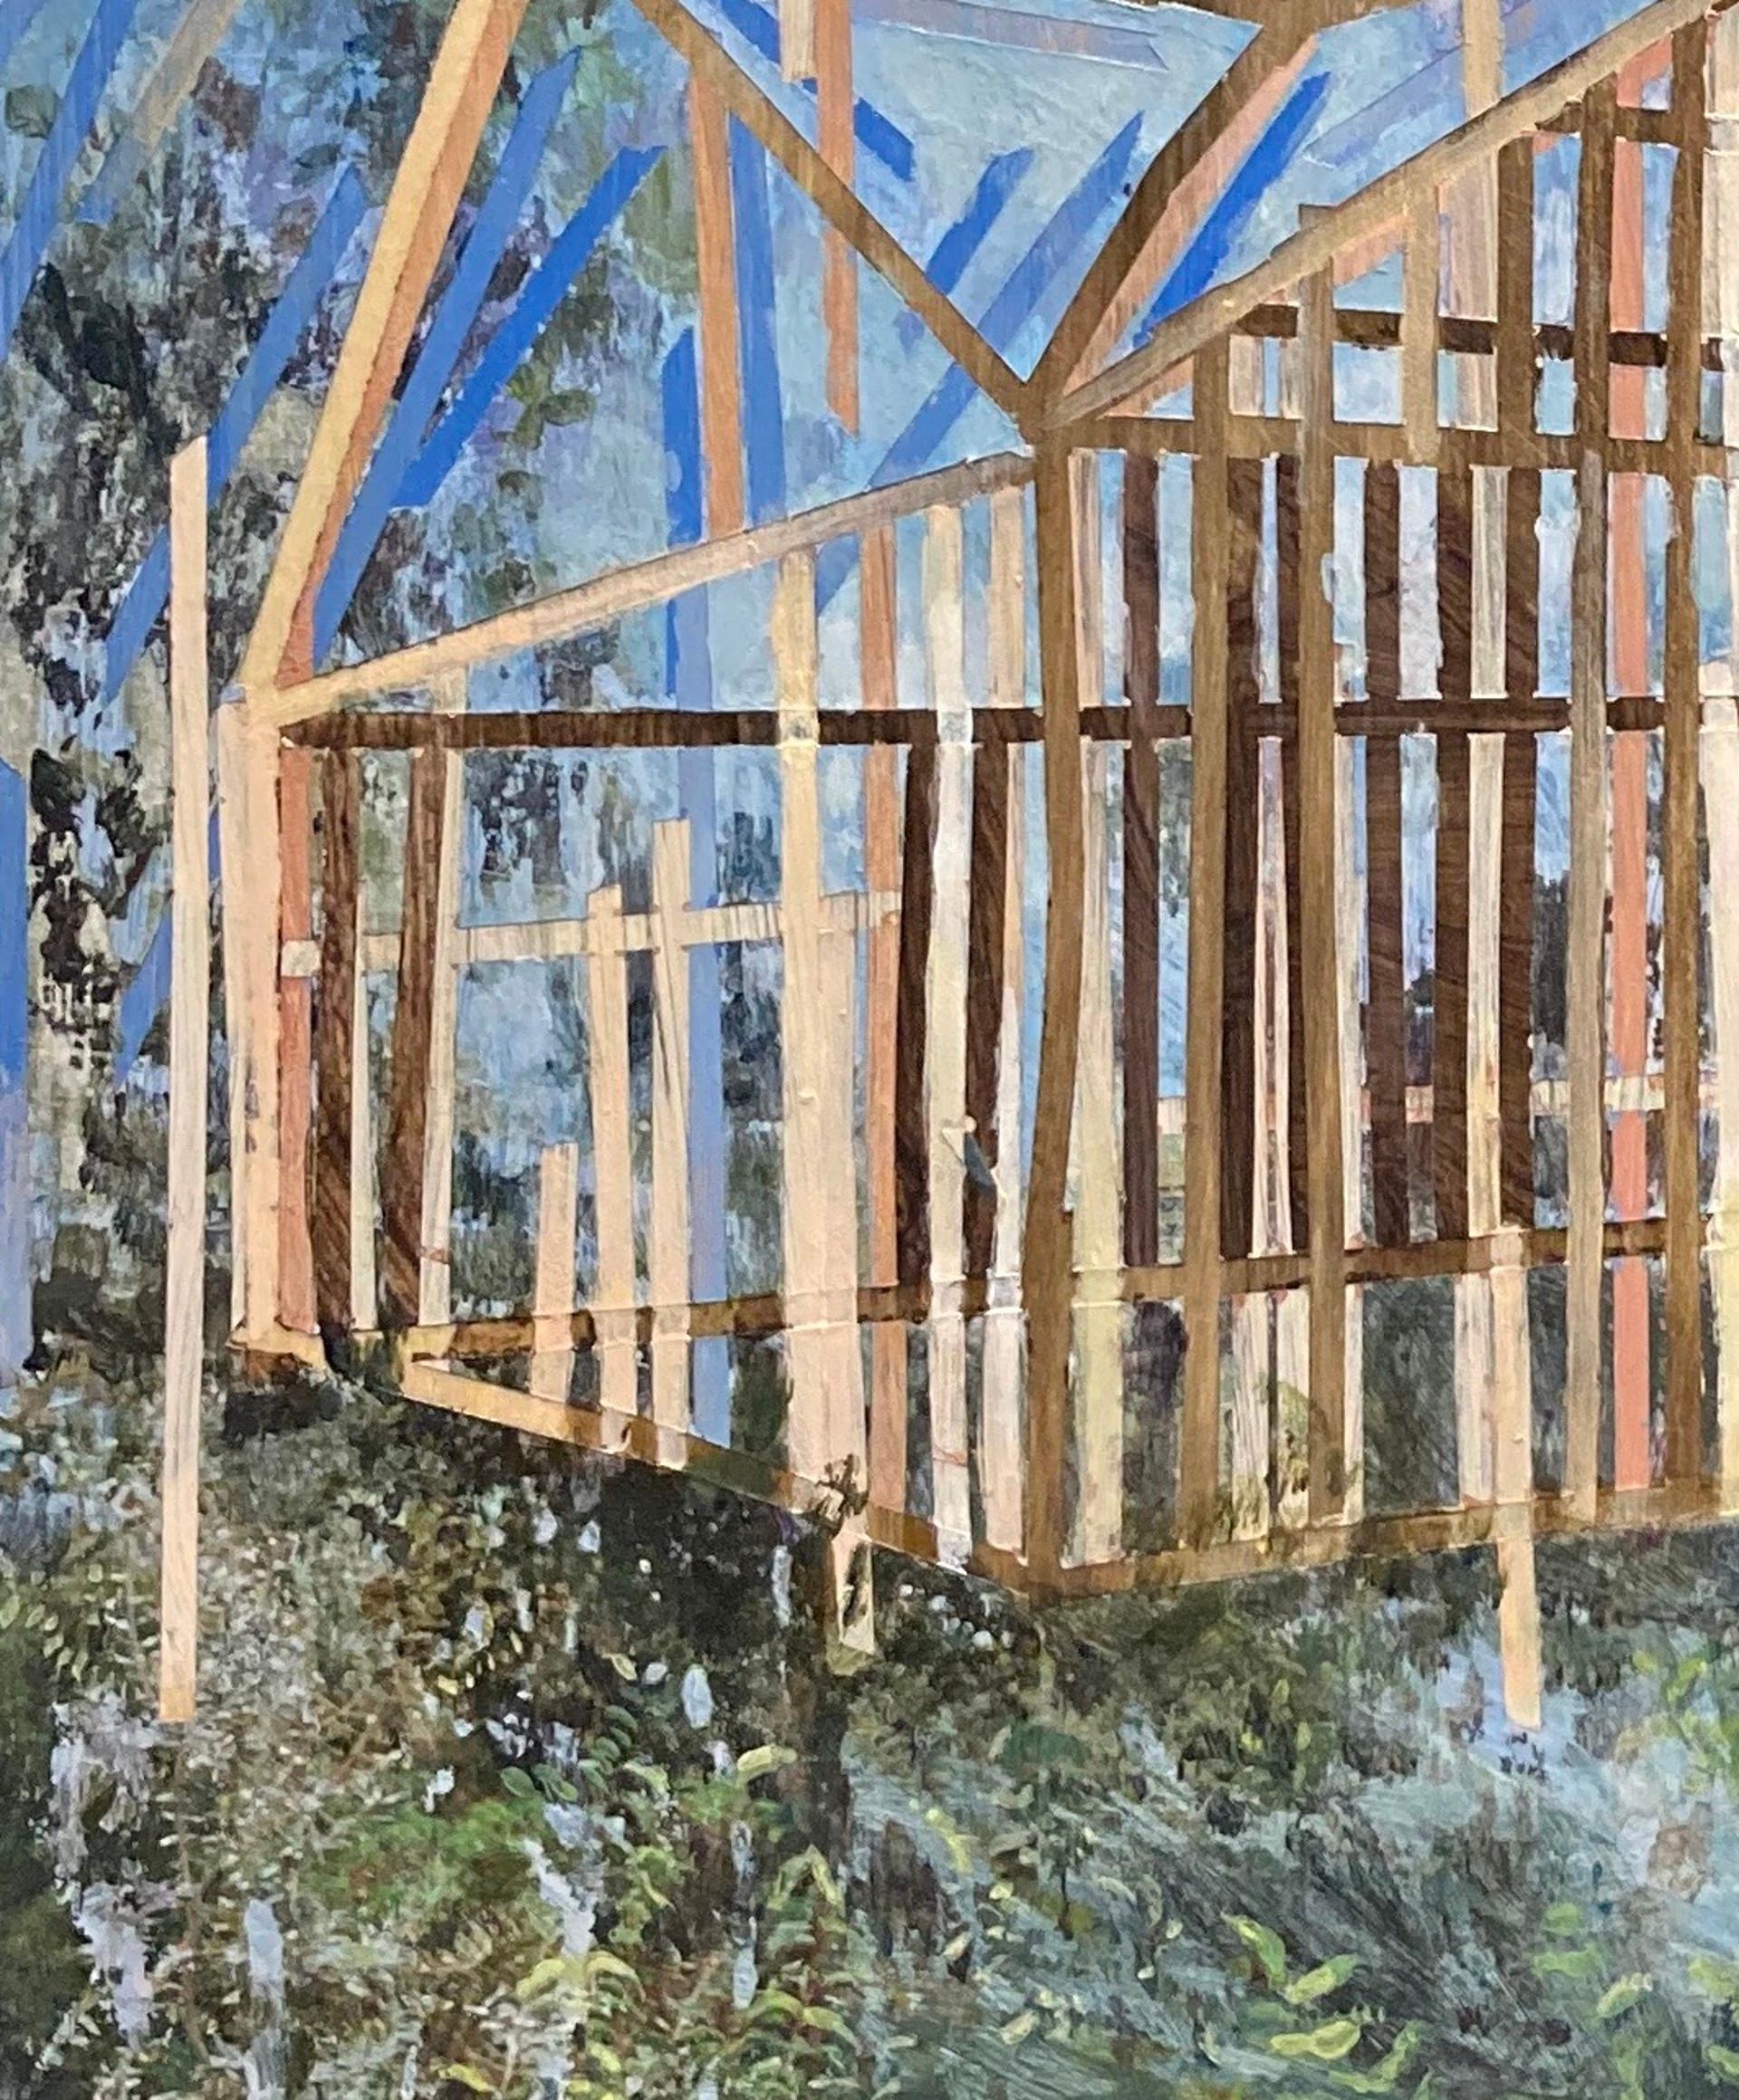 Mandy Rogers Horton is a painter and mixed media artist based in Nashville, TN. Her current body of art reflects on the ongoing construction of our lives and culture from eclectic and disparate sources.